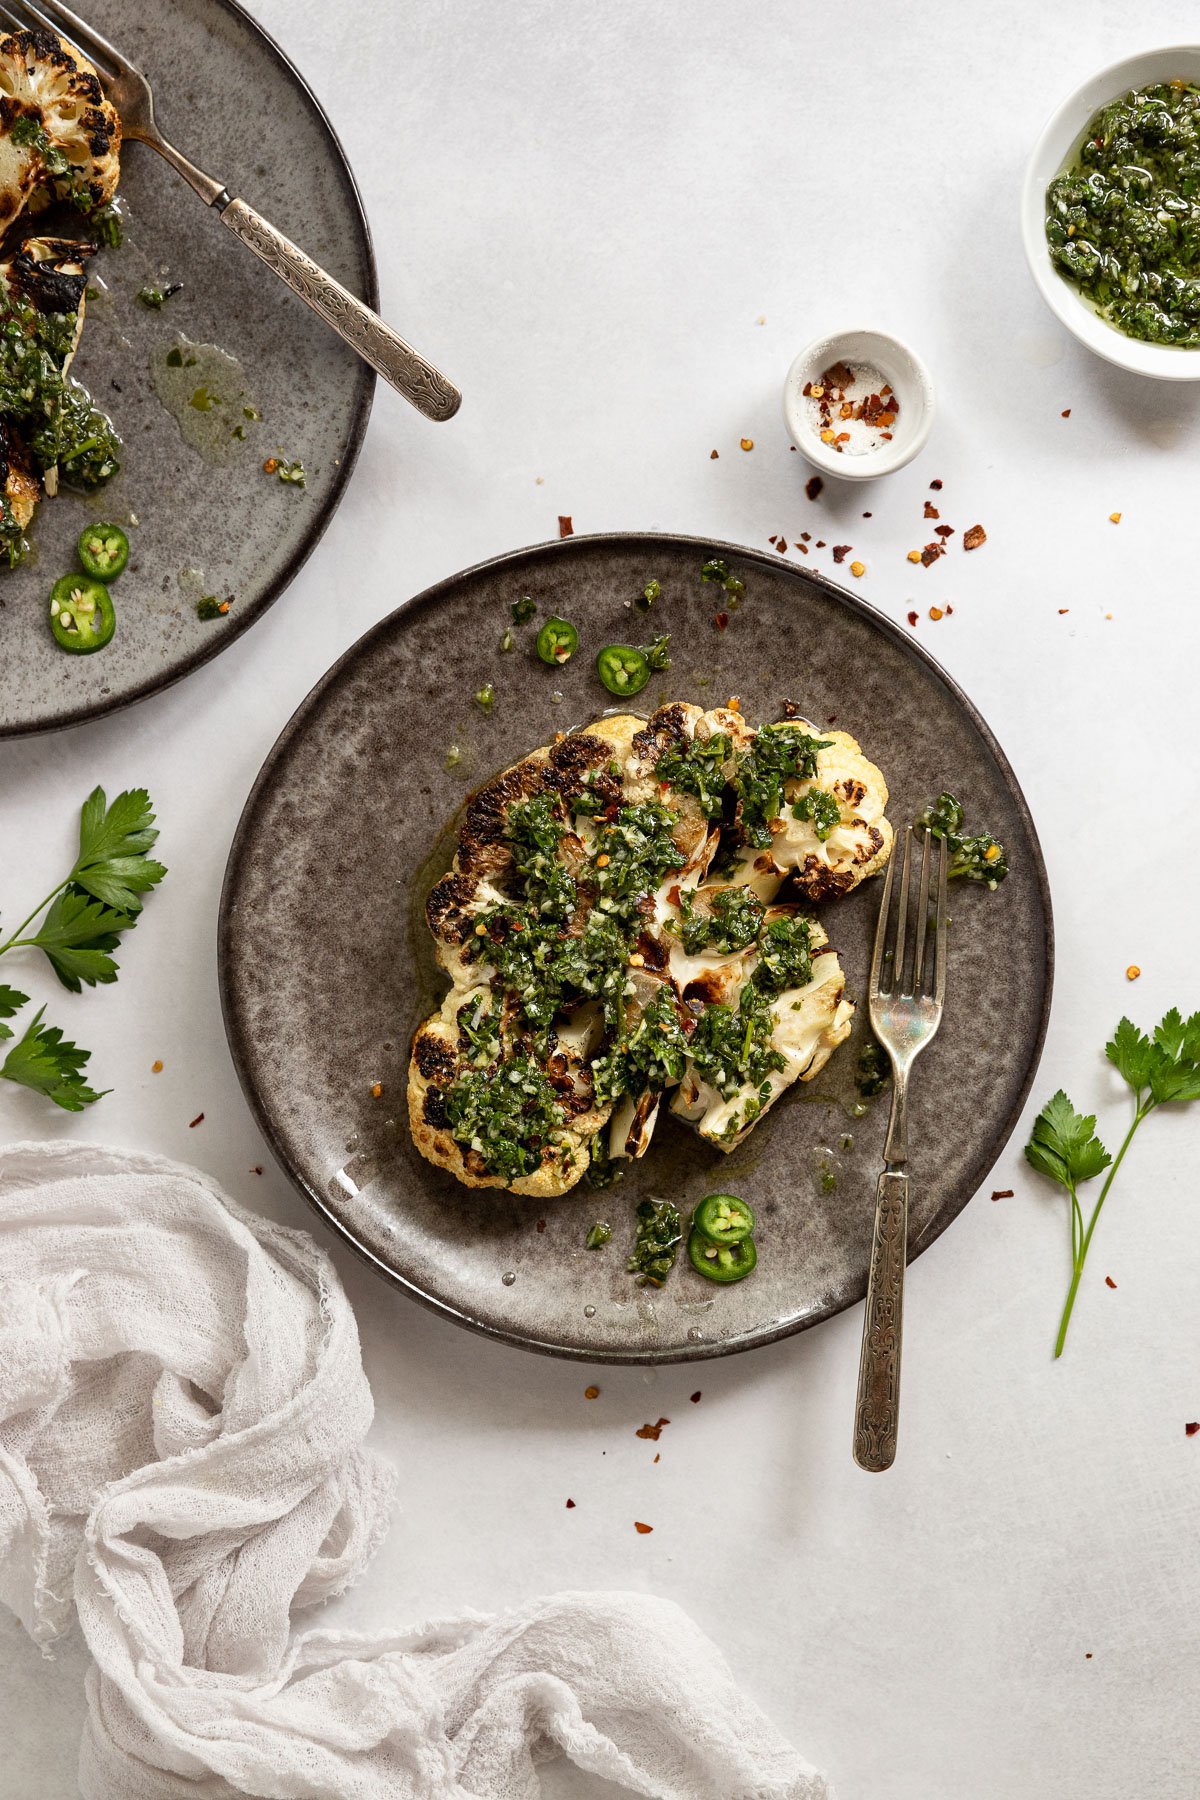 Cauliflower steaks on plates with forks next to linen and chimichurri sauce.